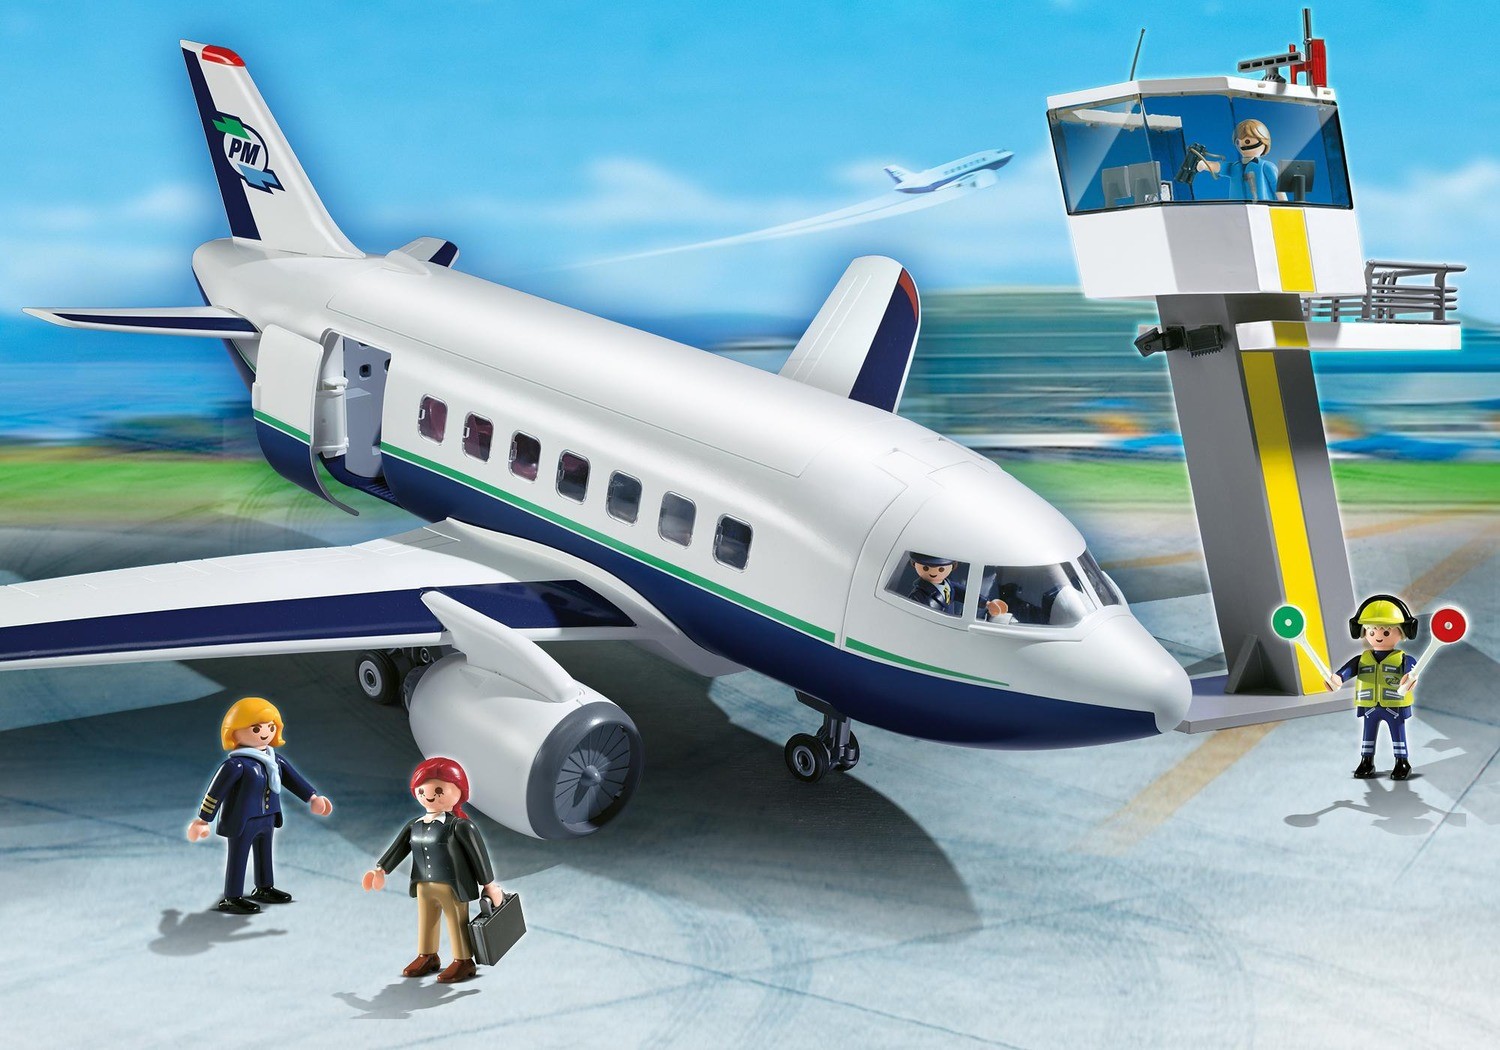 playmobil airport and airplane